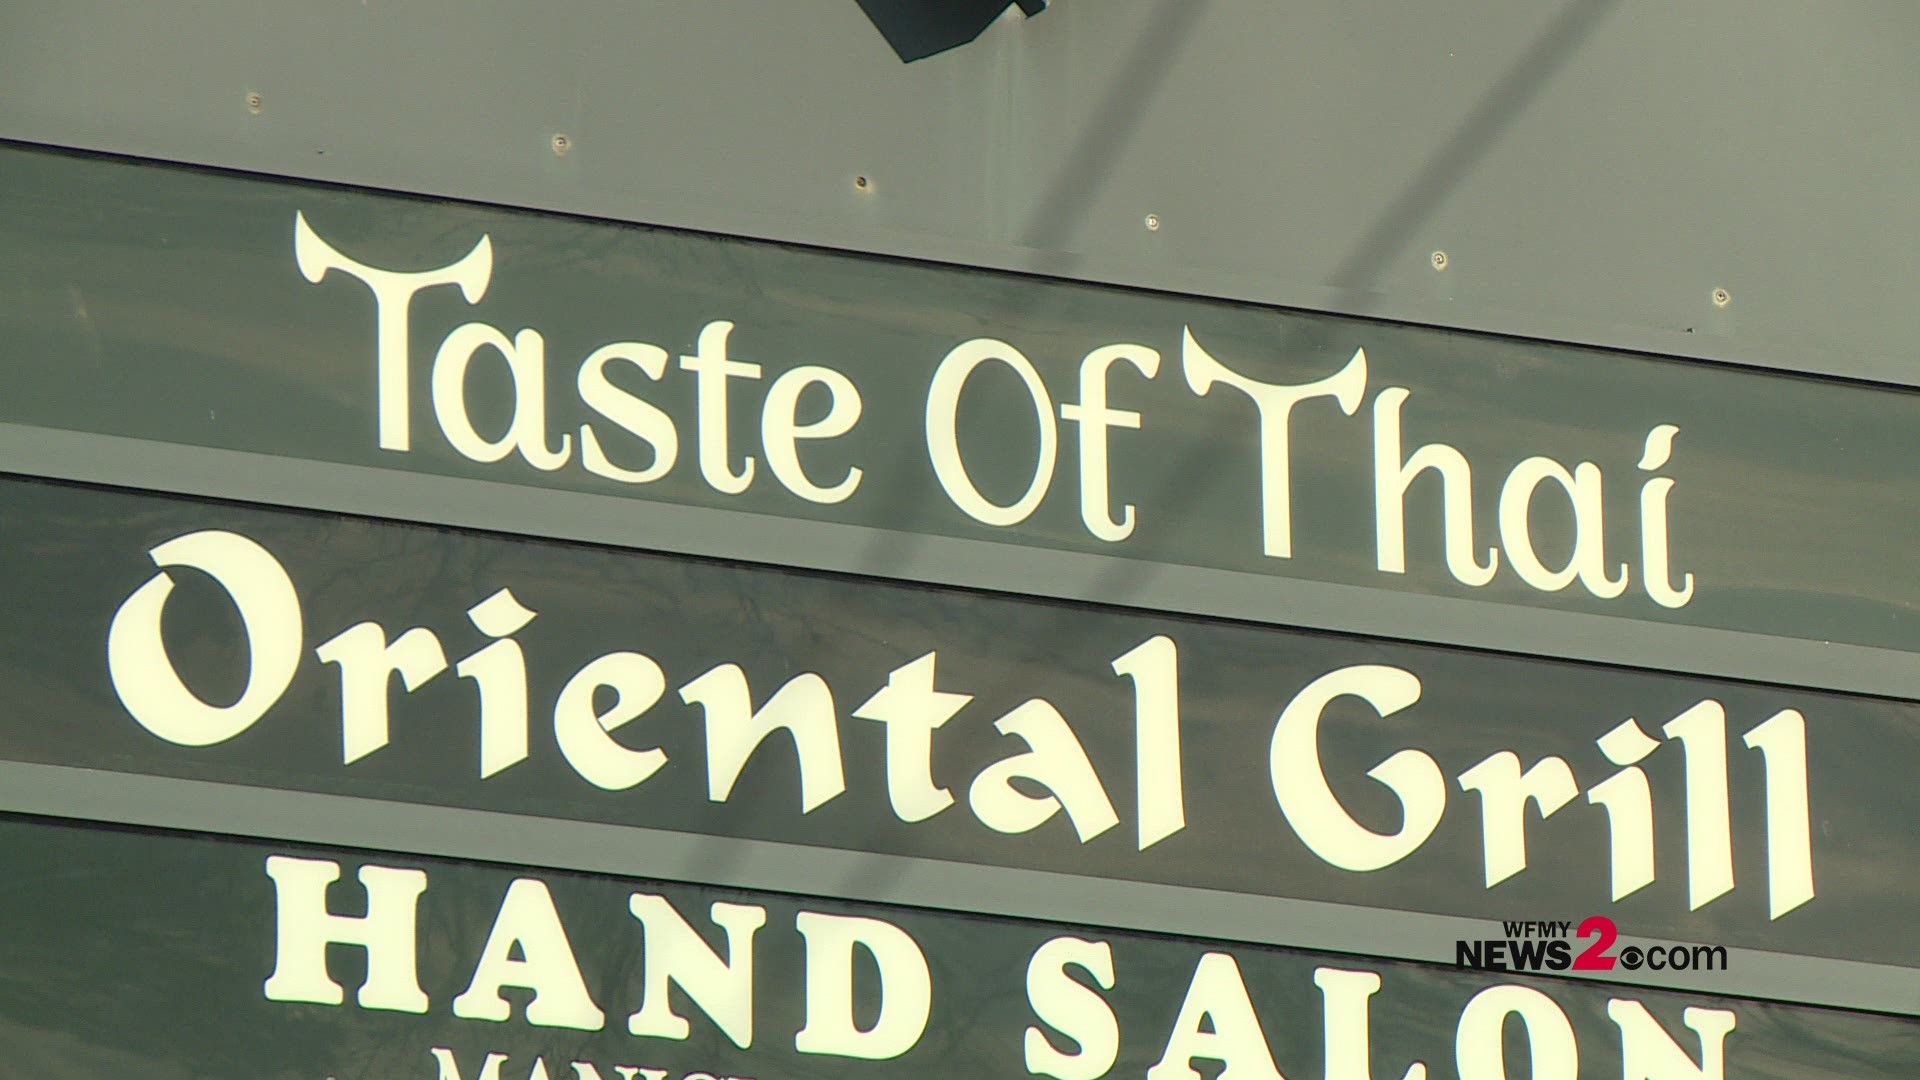 The popular Greensboro restaurant says its lease has ended, and the owner is retiring.